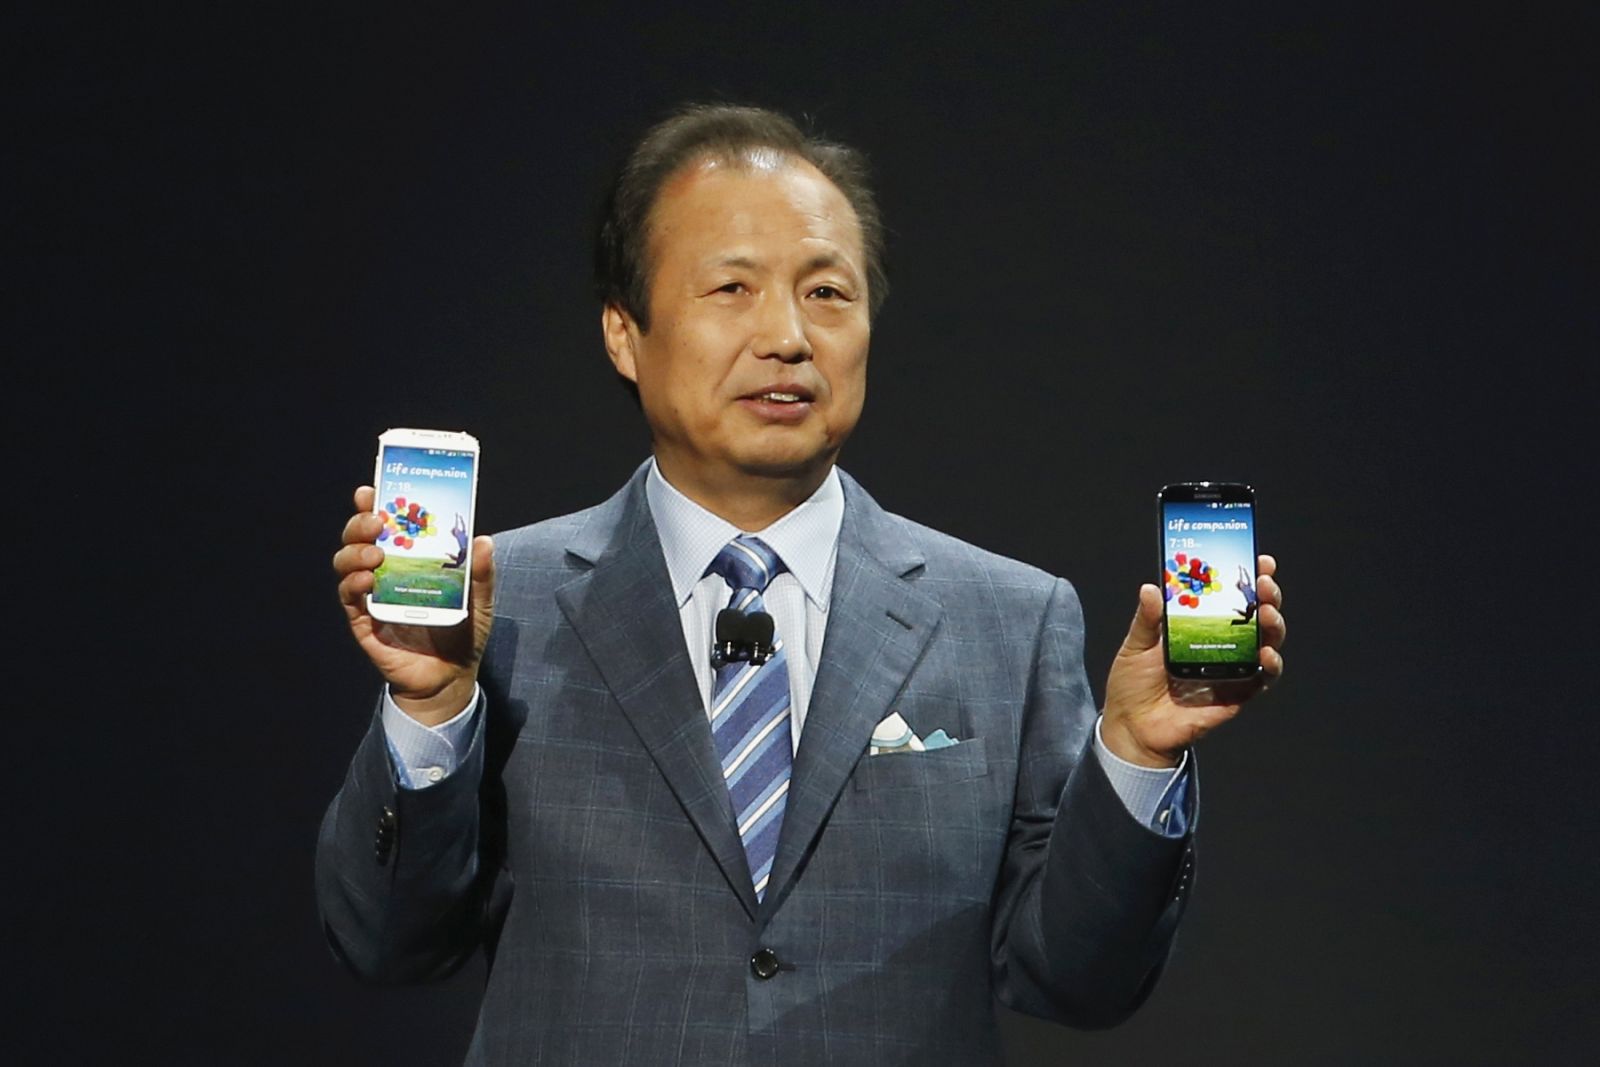 Shin, President and Head of IT and Mobile Communication Division, holds Galaxy S4 phone during its launch at the Radio City Music Hall in New York